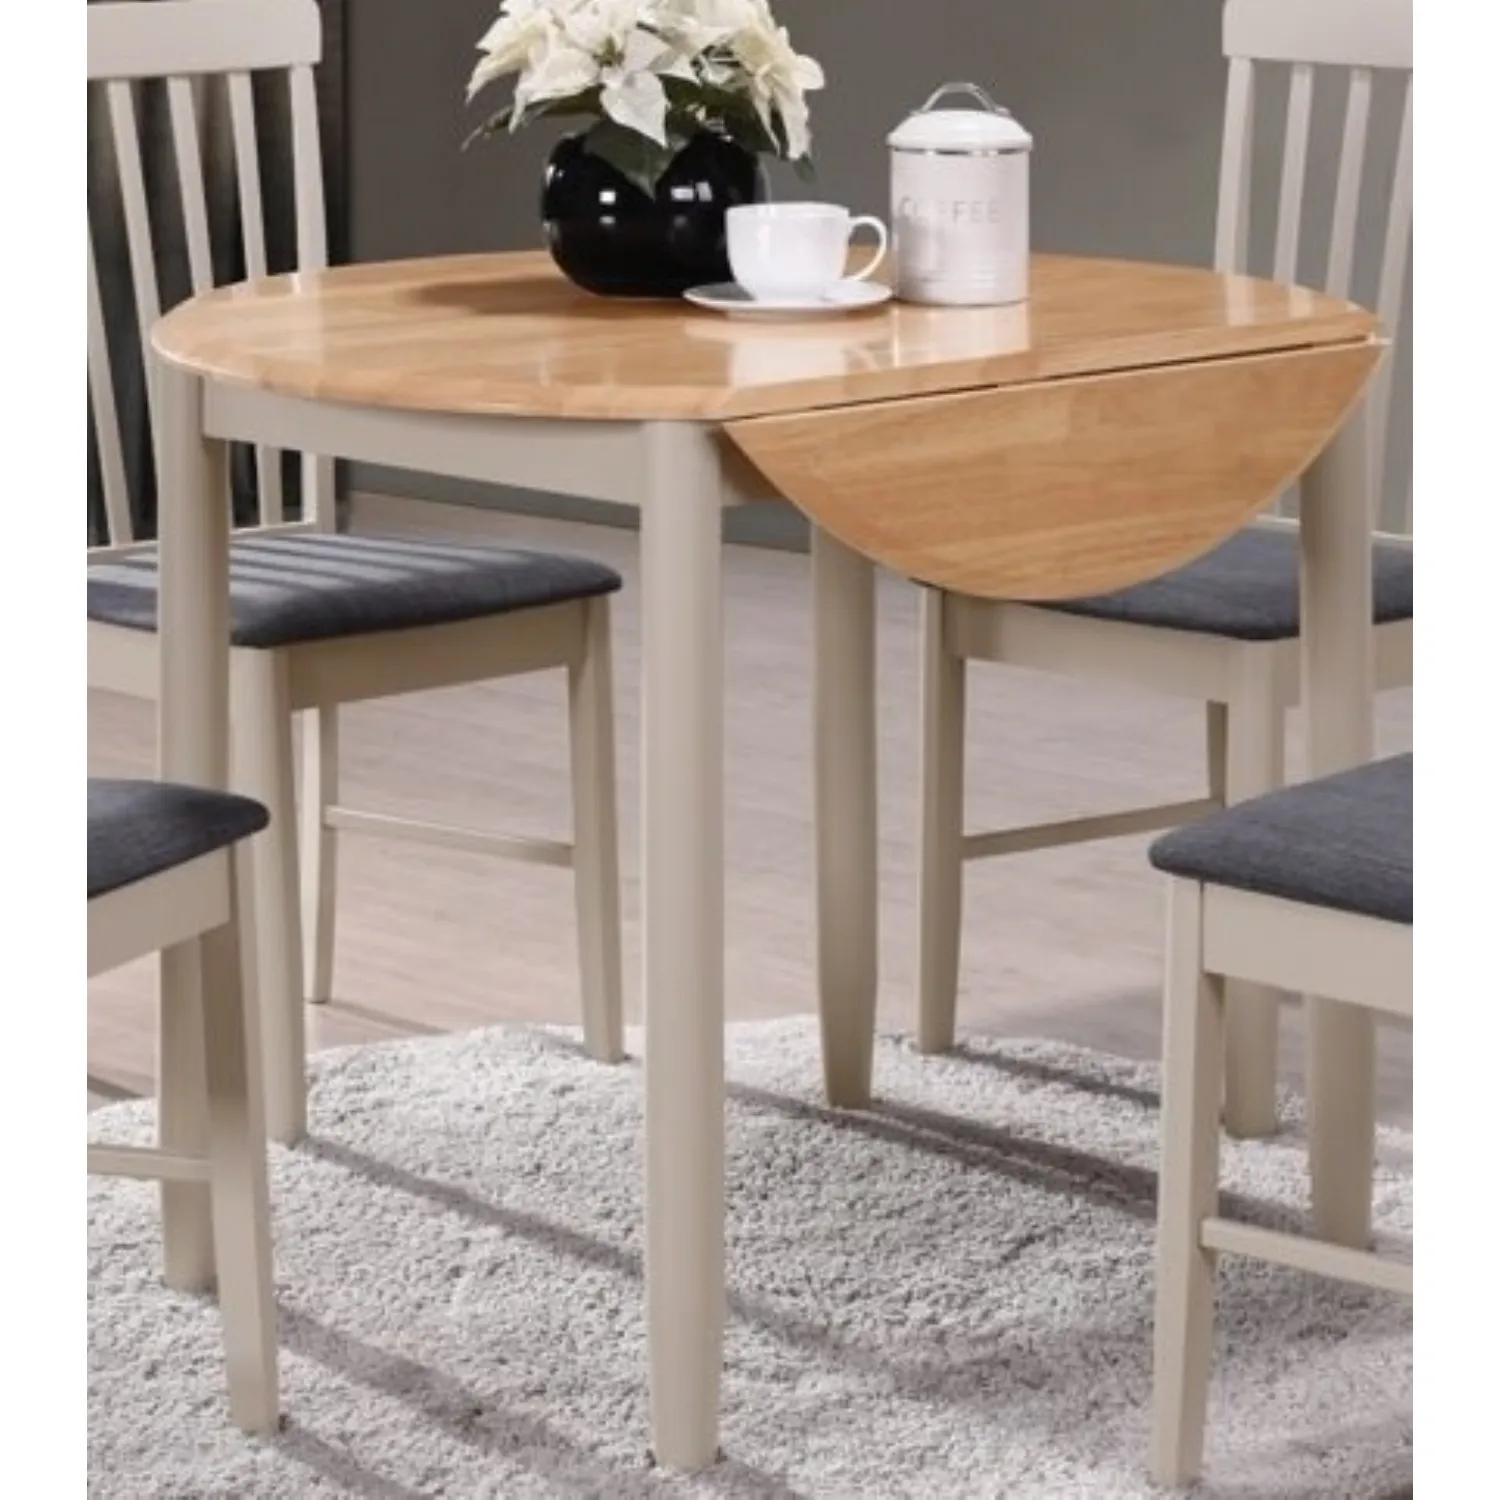 Light Oak and Grey Painted Drop Edge Round Dining Table